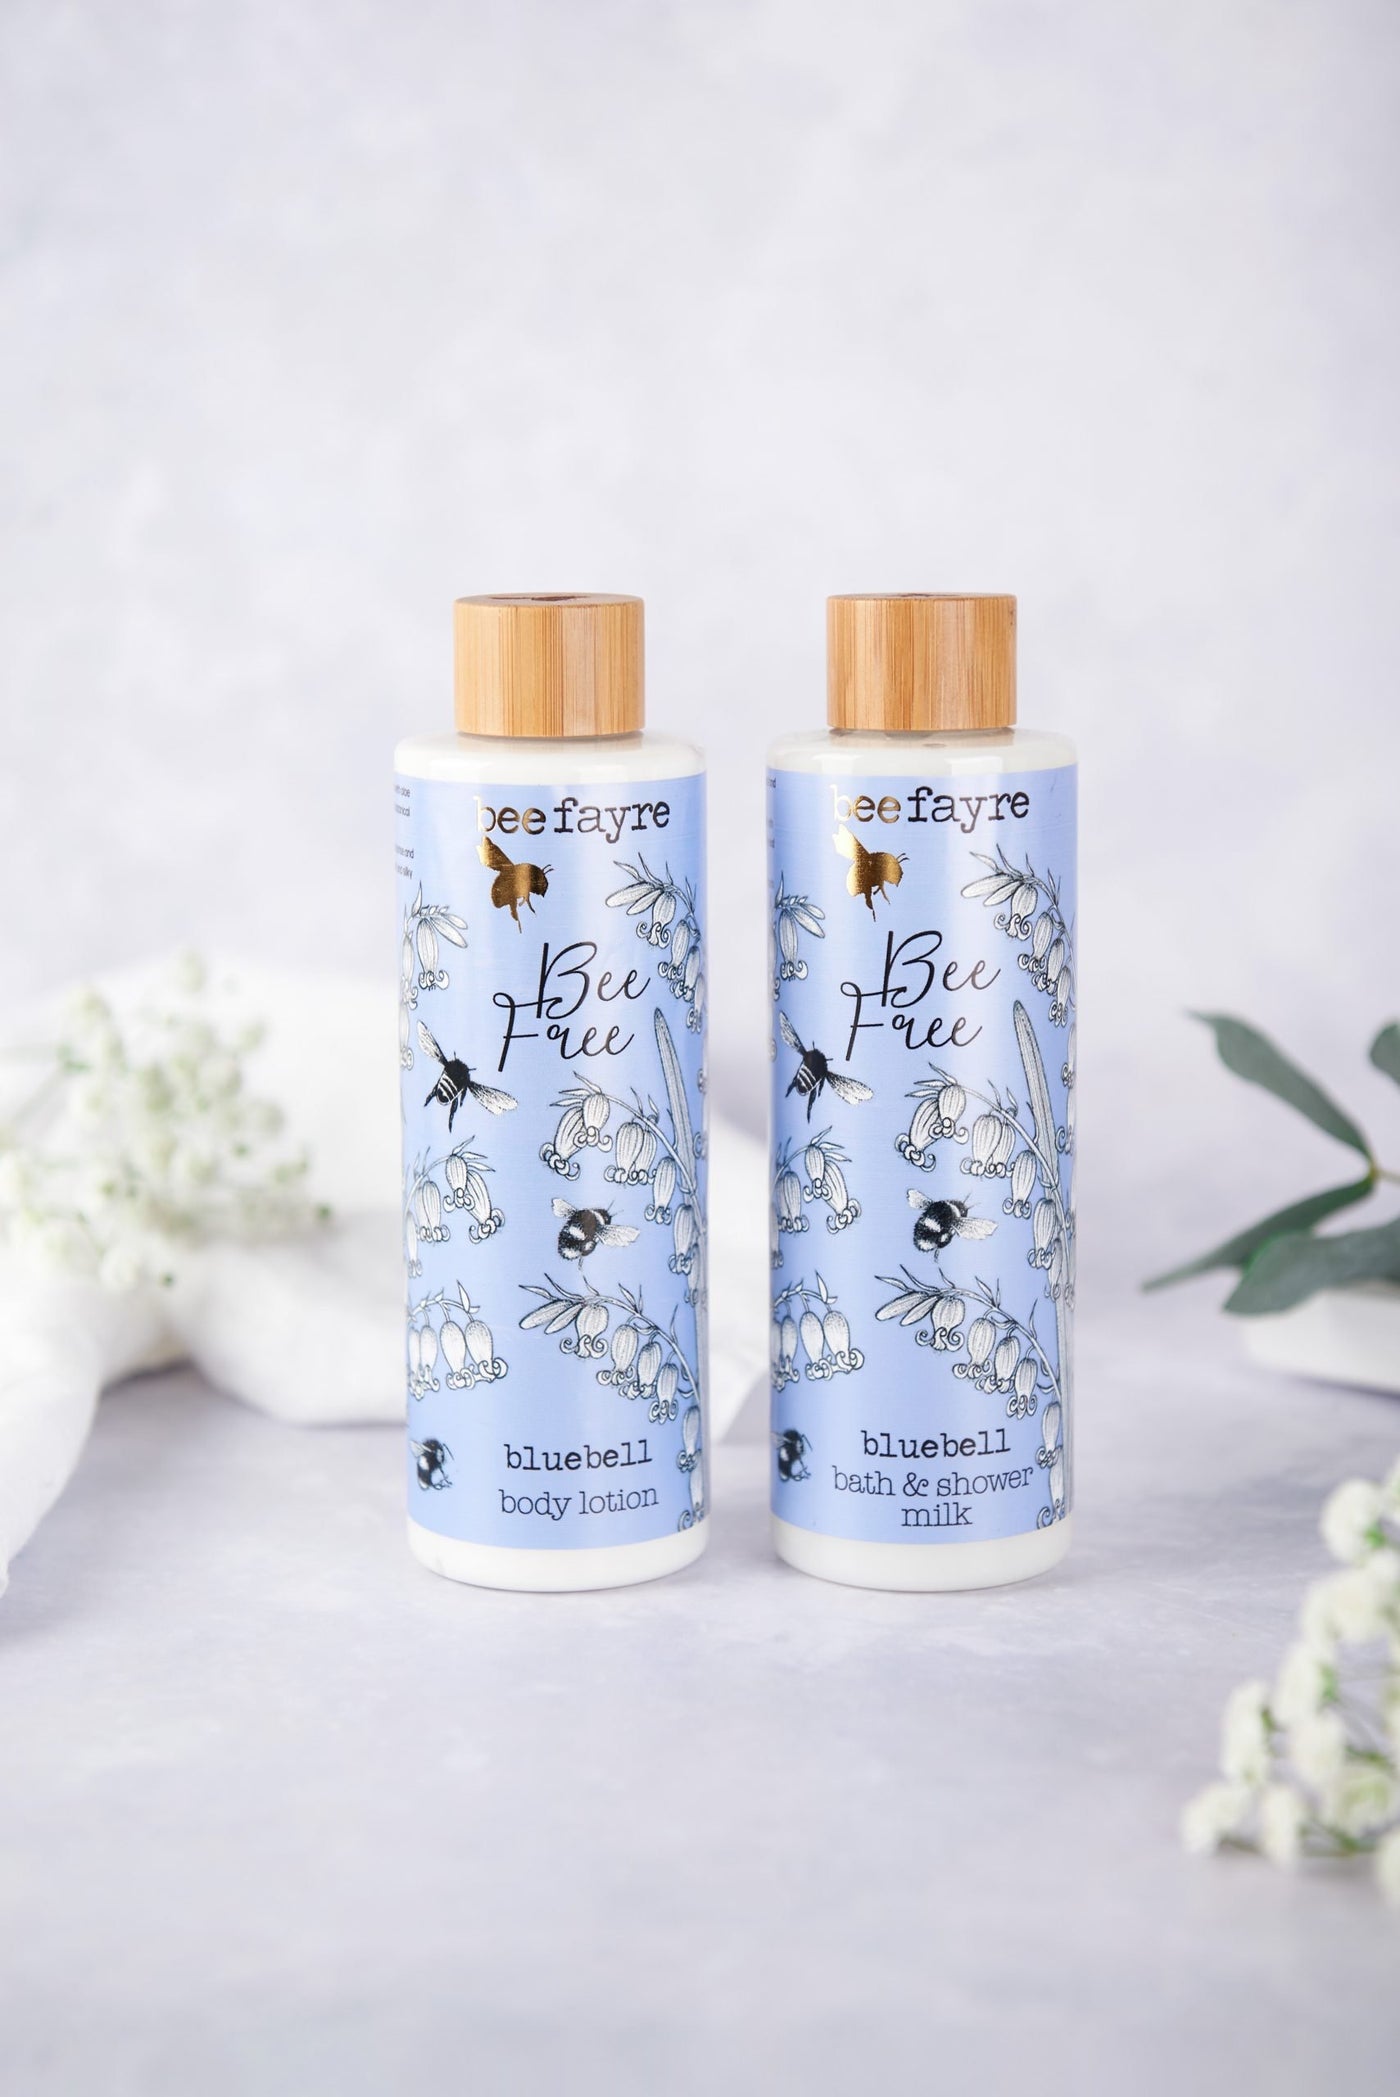 Beefayre Bee Free Bluebell Body Lotion -100ml